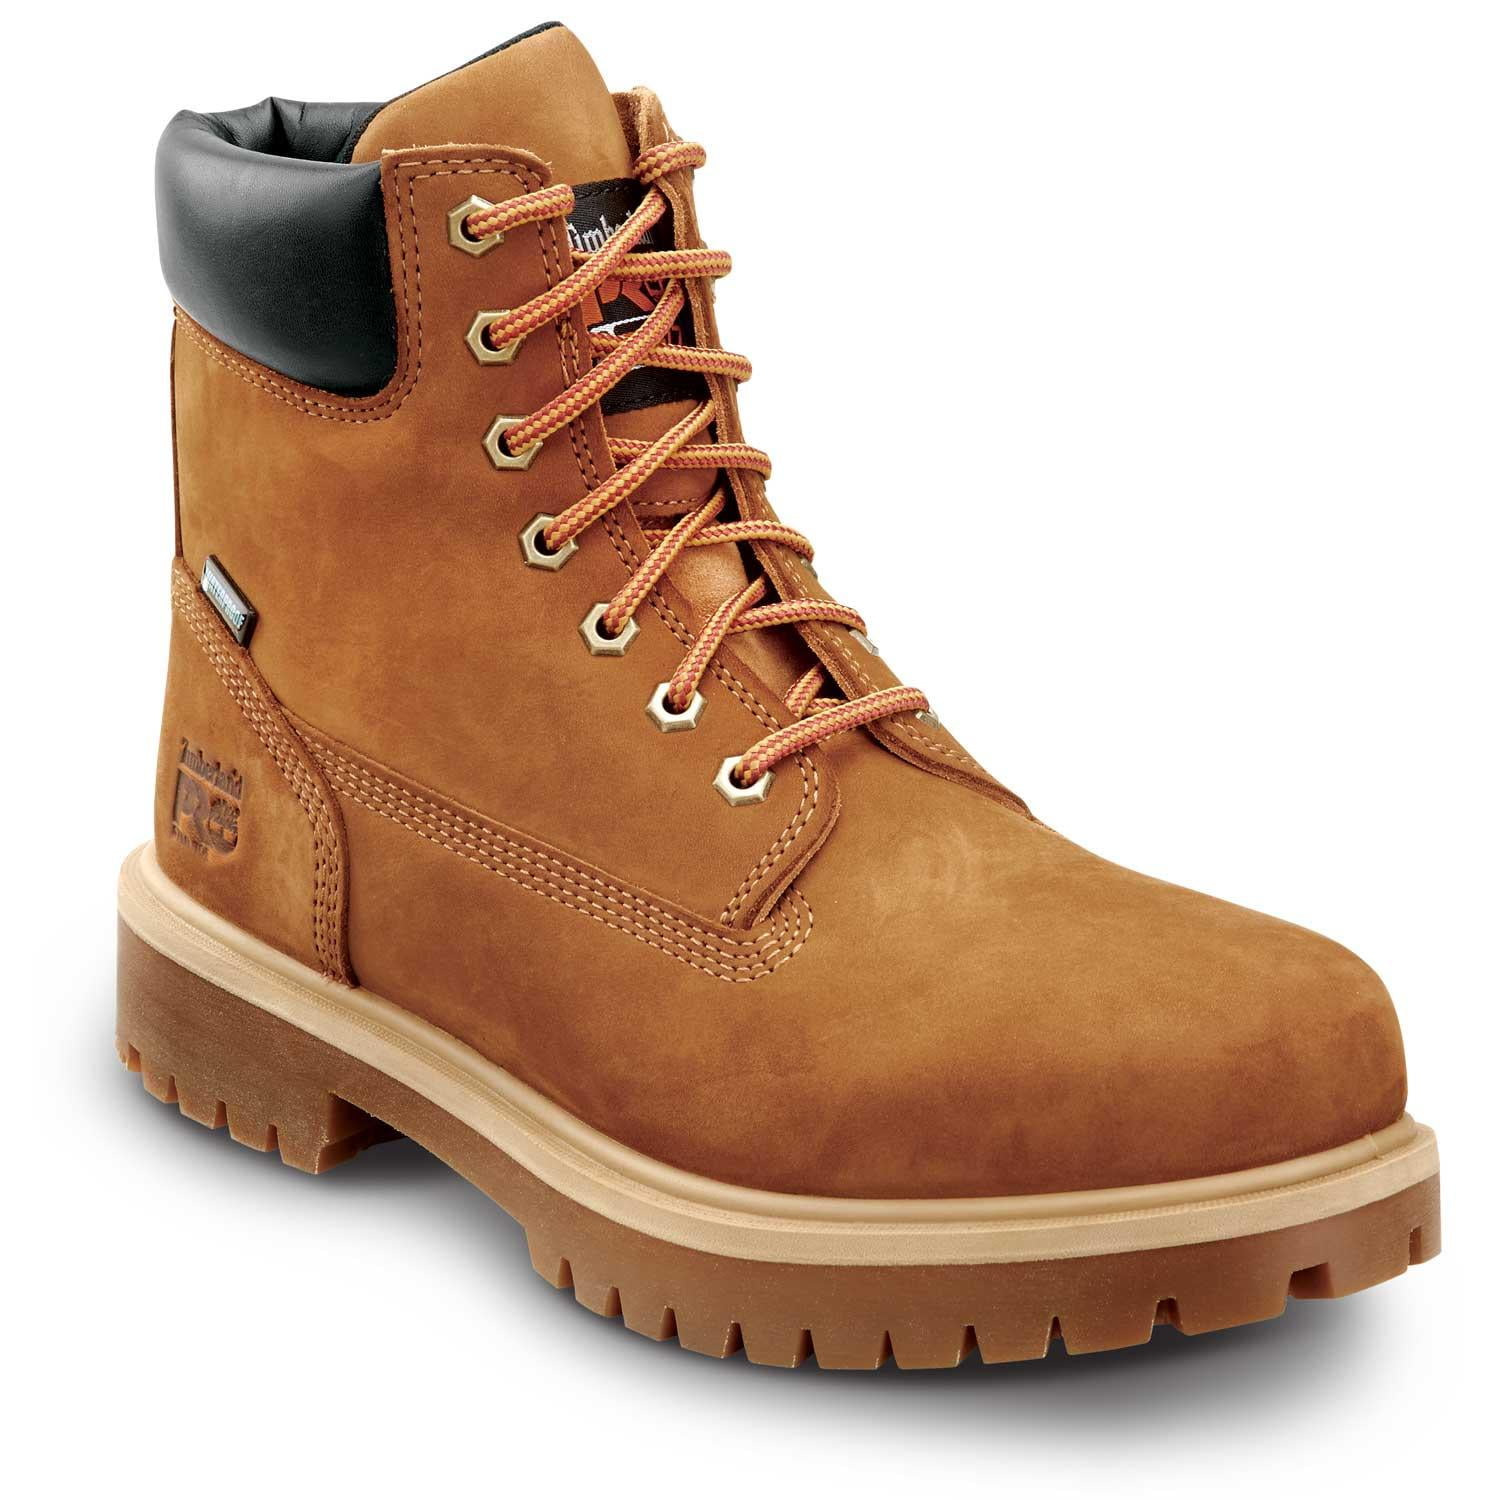 Timberland PRO 6IN Direct Attach Men's, Wheat, Steel Toe, EH, Slip Resistant, WP Boot (10.0 M) - Walmart.com